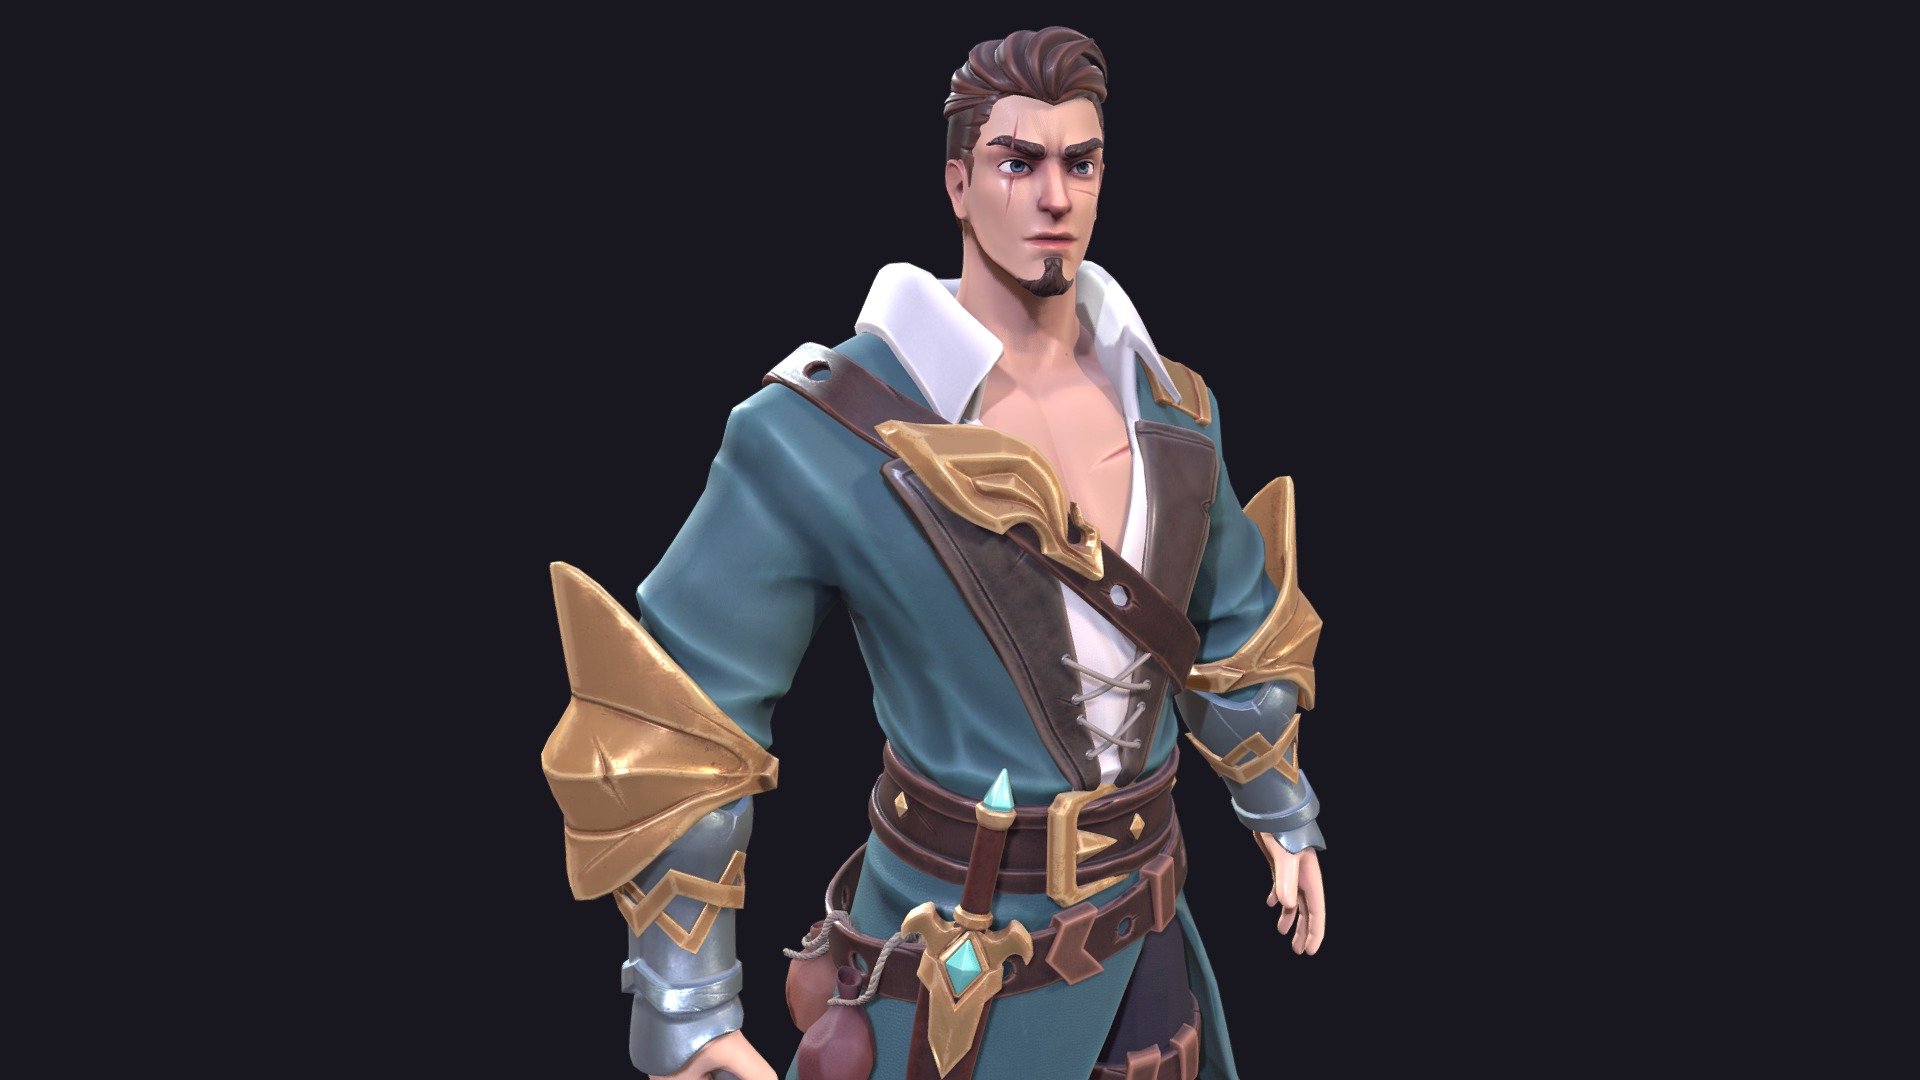 This character is based on Sean Shao's concept art: 
https://www.artstation.com/artwork/xJYJkE

But I made some modifications to it. I mainly got inspiration from games like Overwatch, Sea of Thieves and Fortnite.

See more on my Artstation https://www.artstation.com/victoriareinhold - Pirate - 3D model by Victoria Reinhold (@reinhold) 3d model